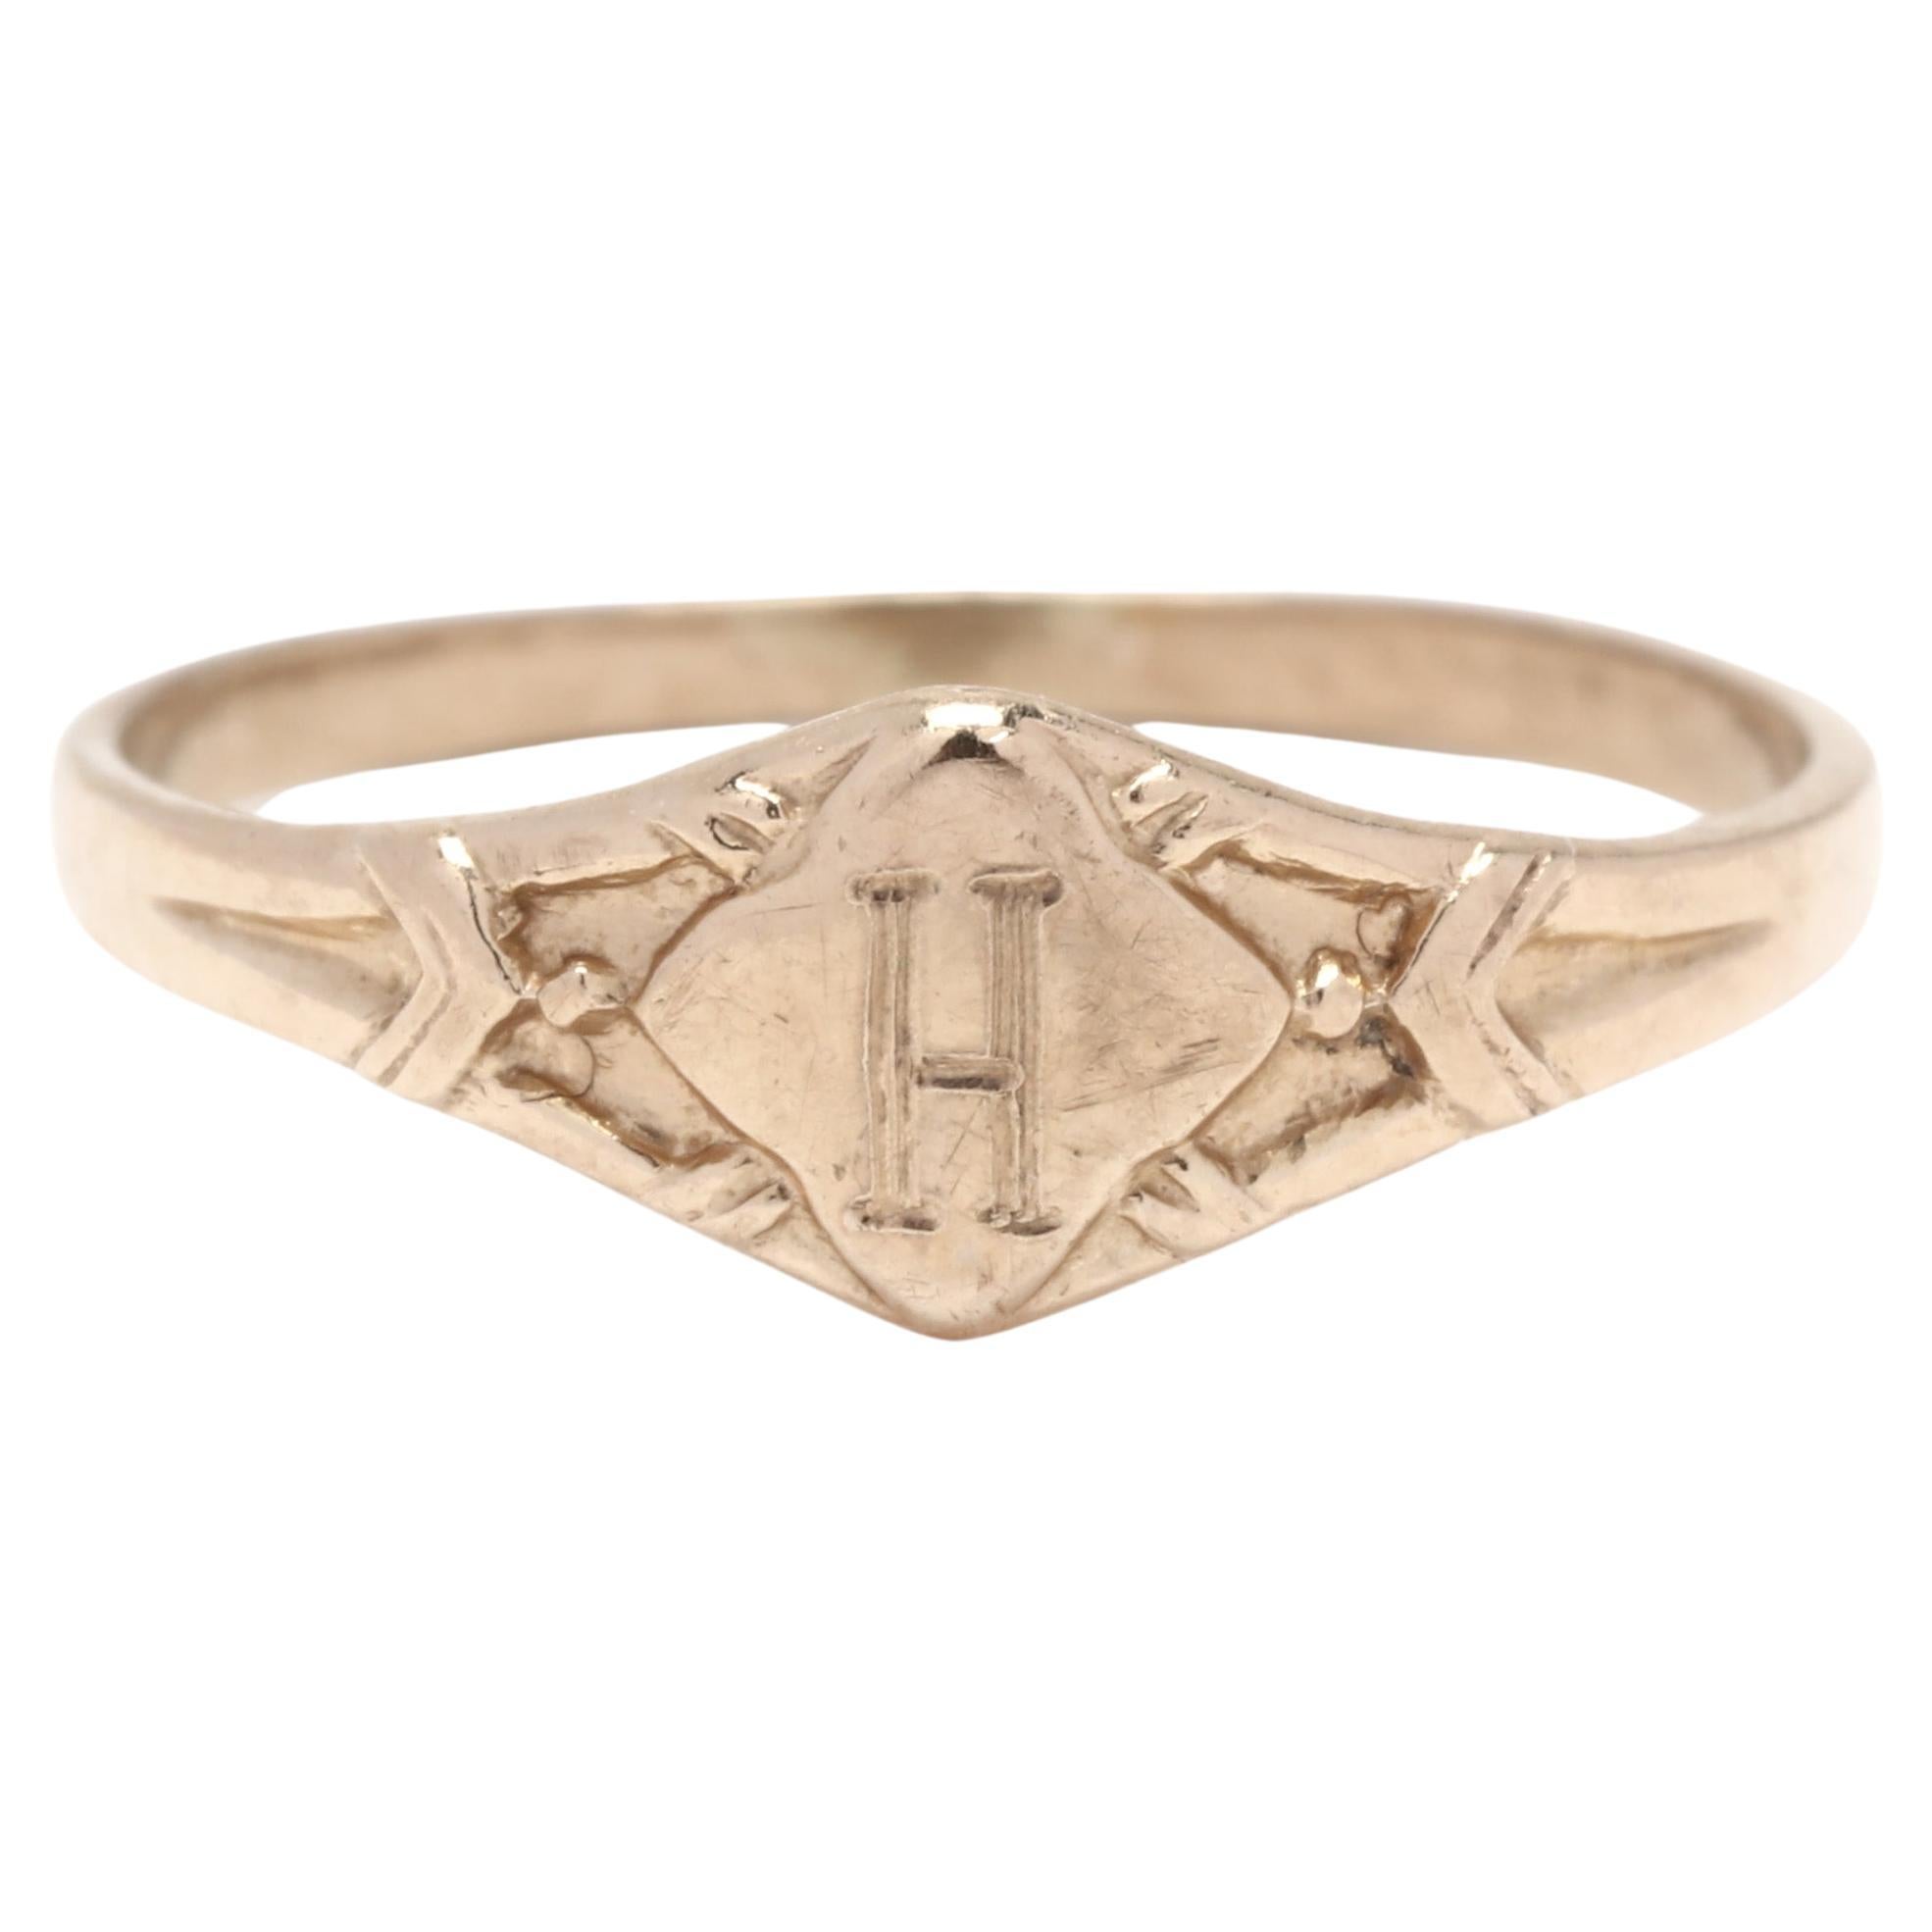 Vintage H Initial Baby Signet Ring, 10K Yellow Gold, Ring Size 2, H Initial Midi